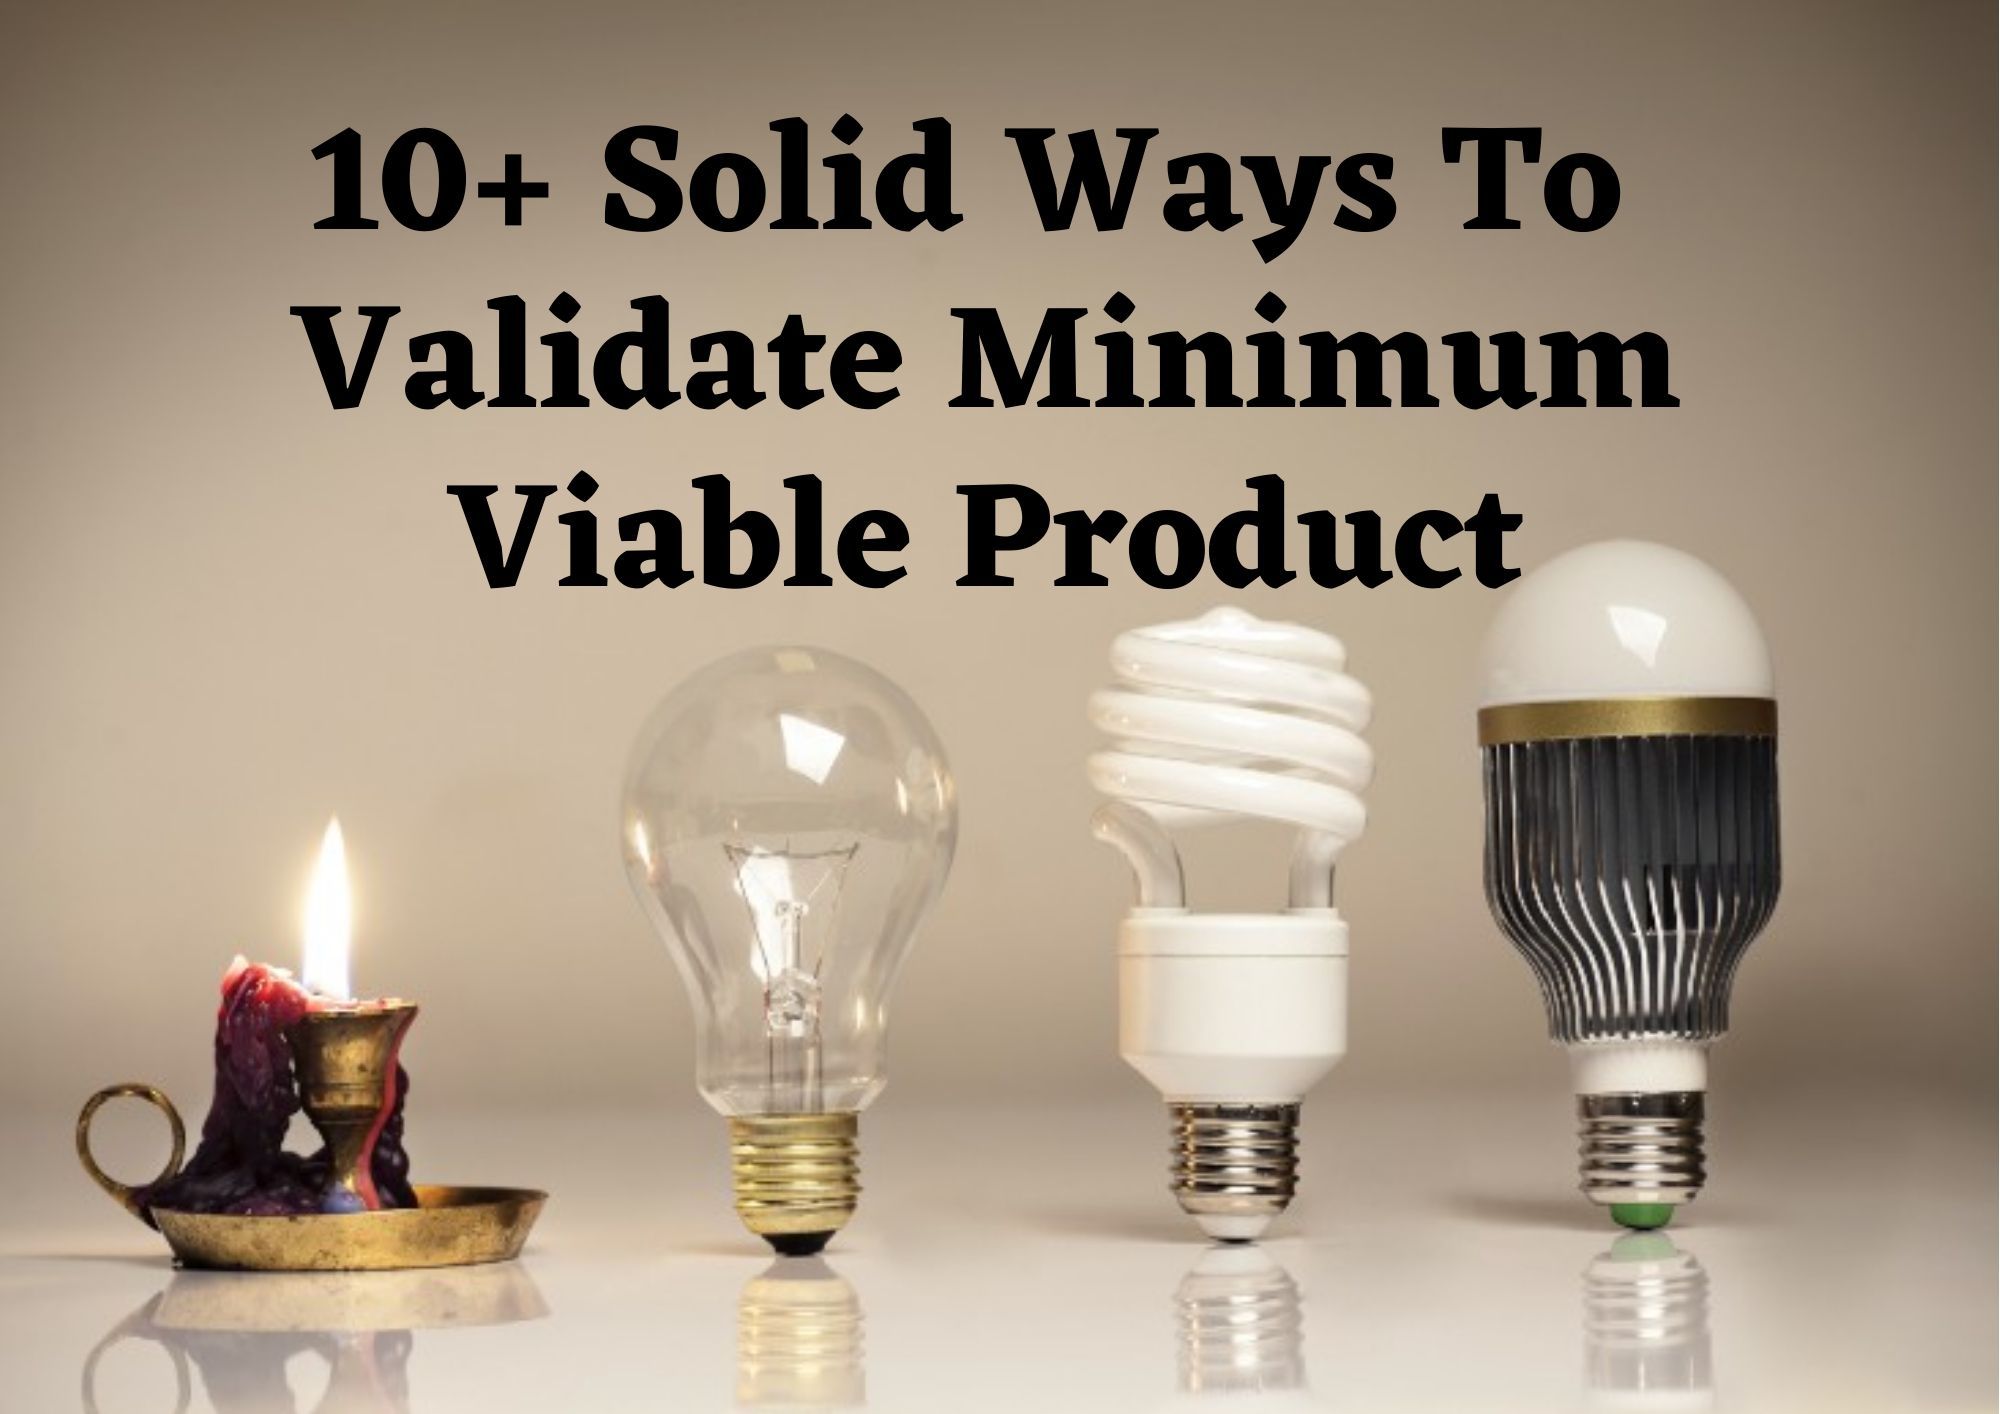 featured image - 10 Great Ways to Evaluate your Minimum Viable Product (MVP)